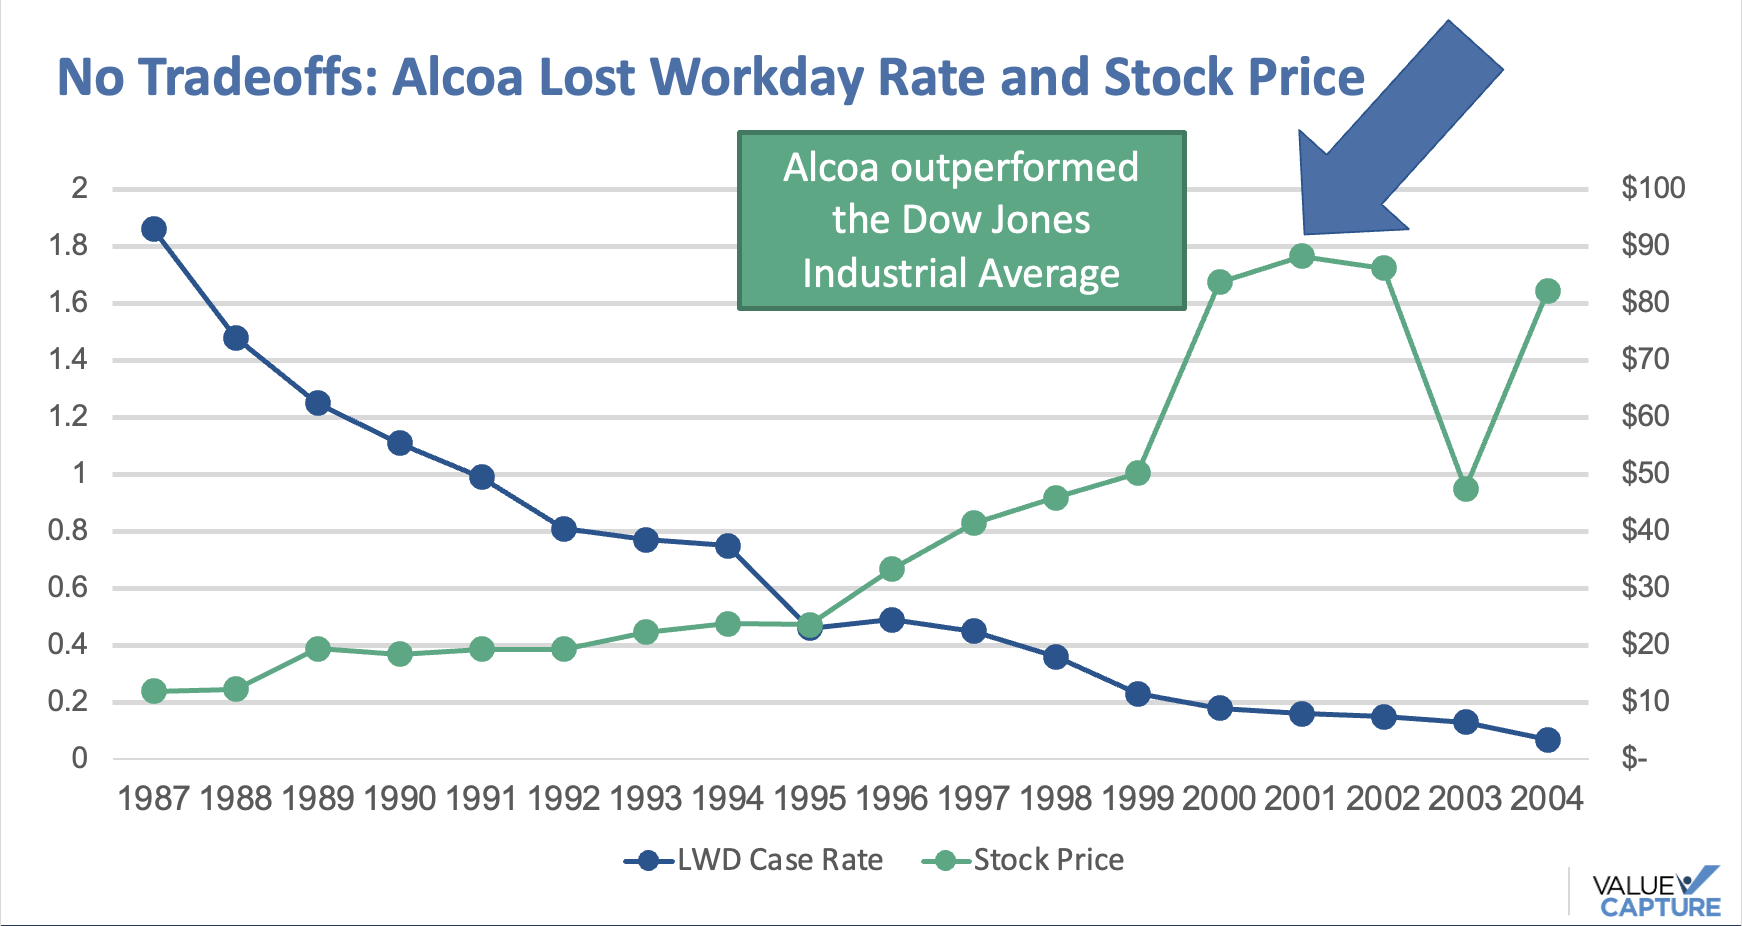 Alcoa safety and stock performance